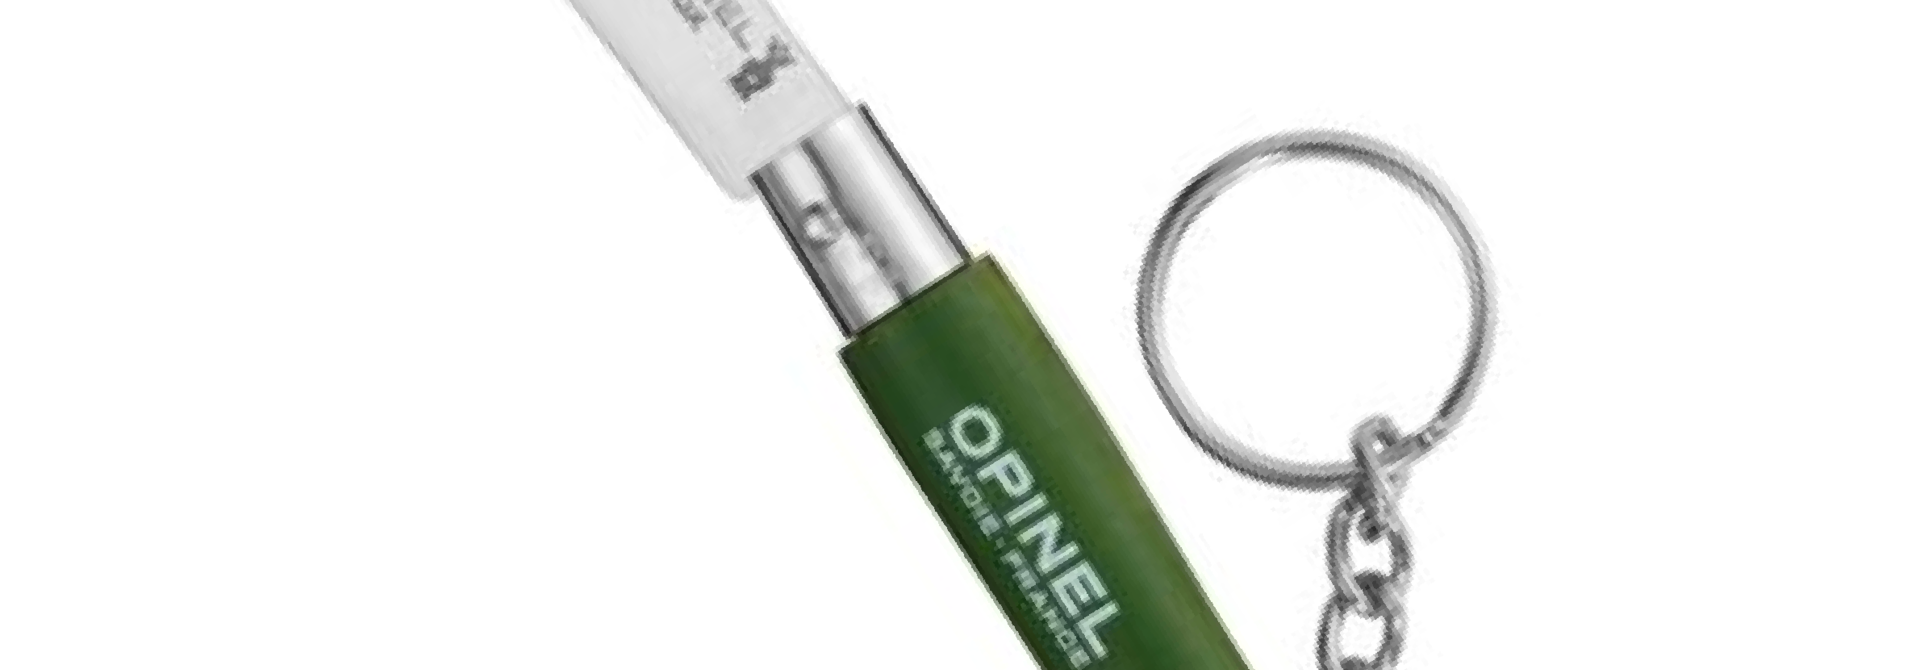 No. 4 Key Ring Colorama, Forest Green